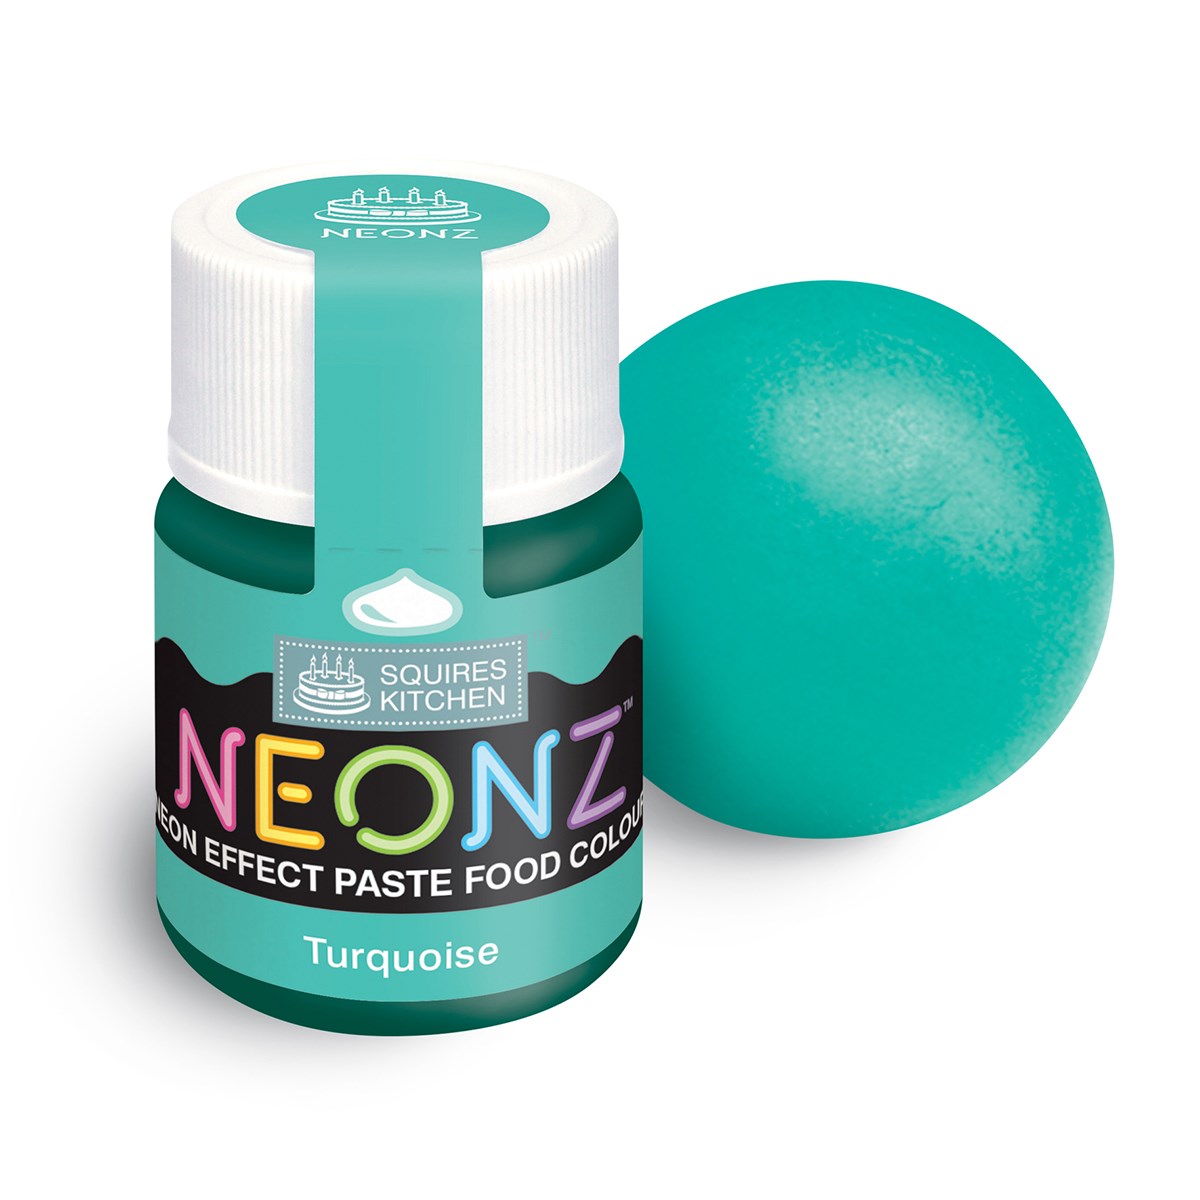 Squires Kitchen Neonz Neon Effect Concentrated Paste Food Colouring - 20g - Turquoise